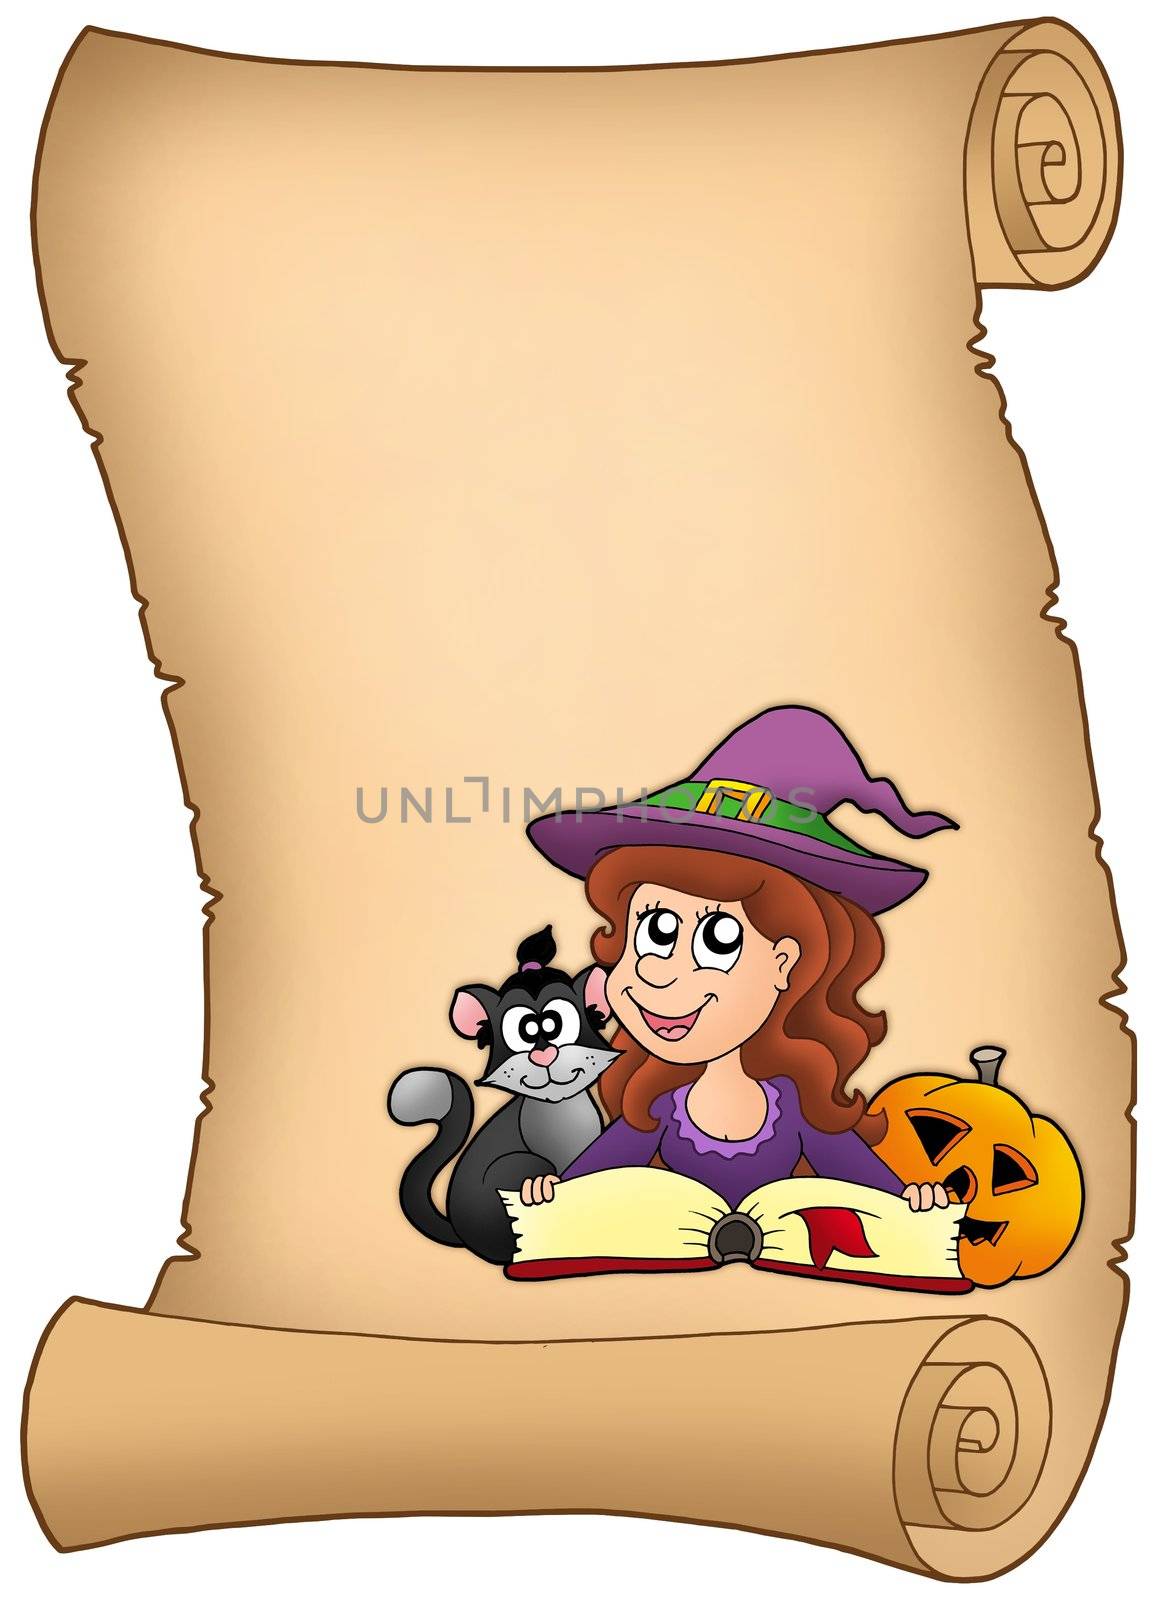 Parchment with Halloween girl - color illustration.